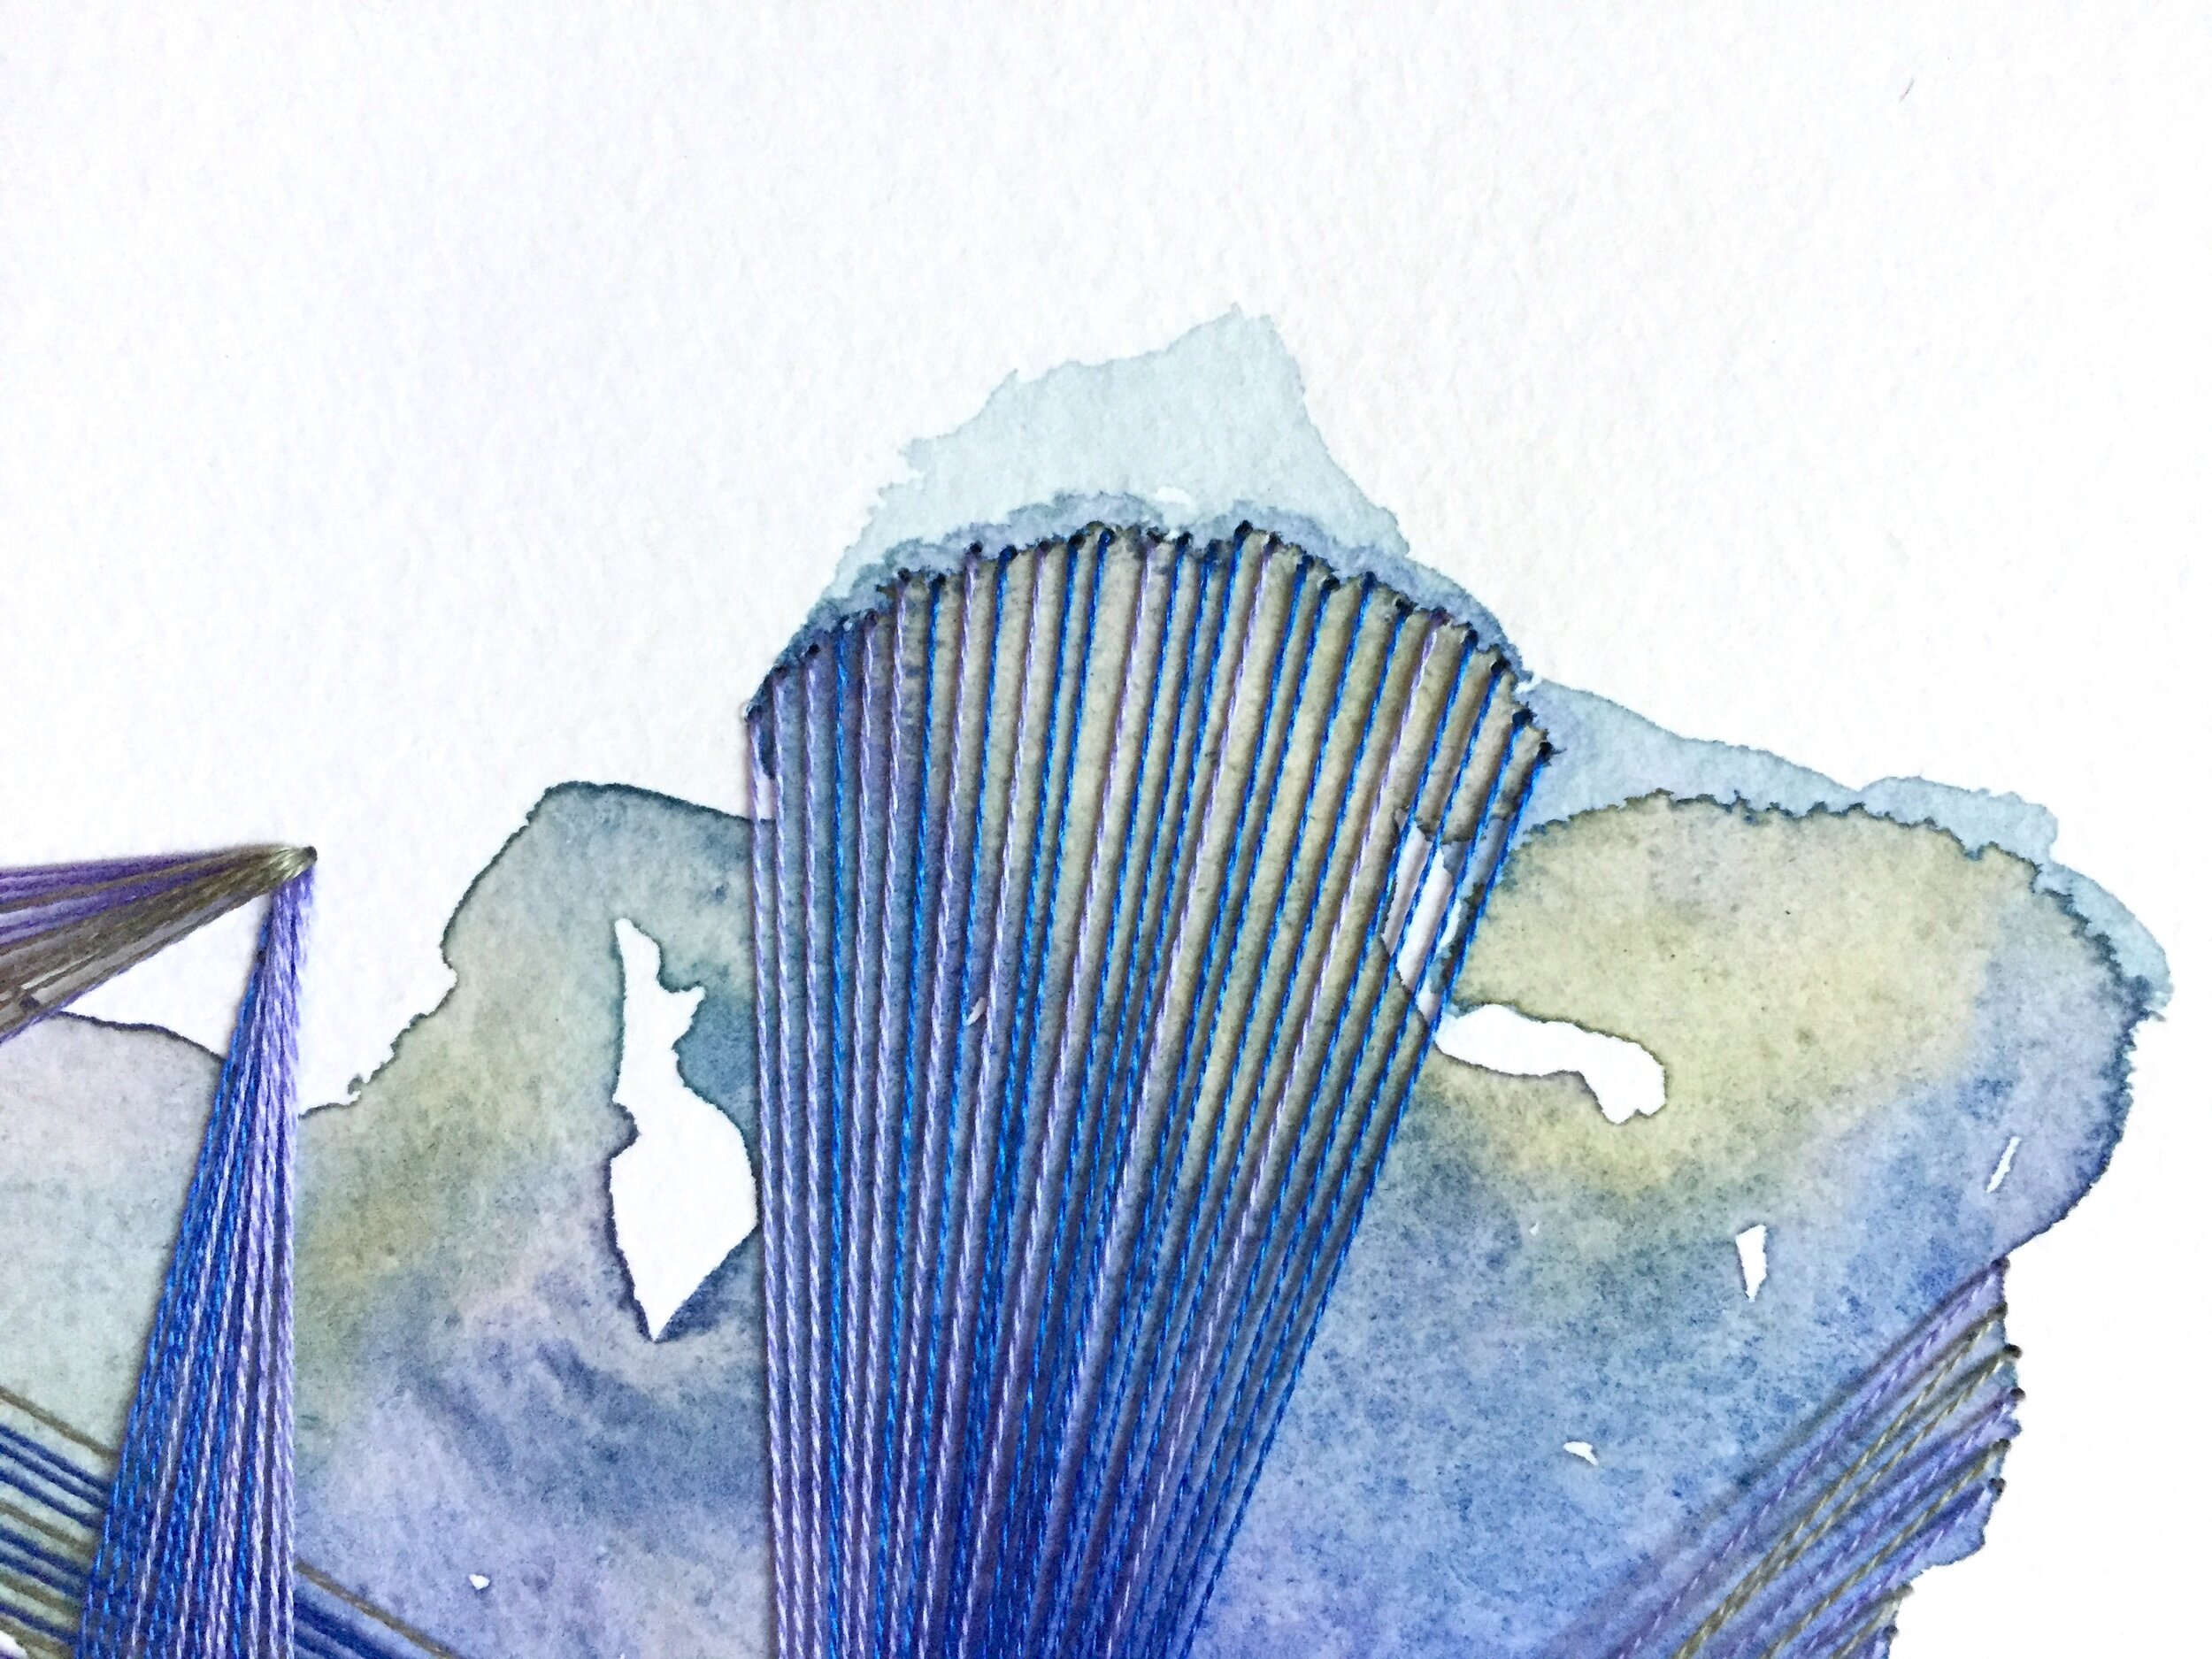 Watercolor and Embroidery in Blue--detail 2